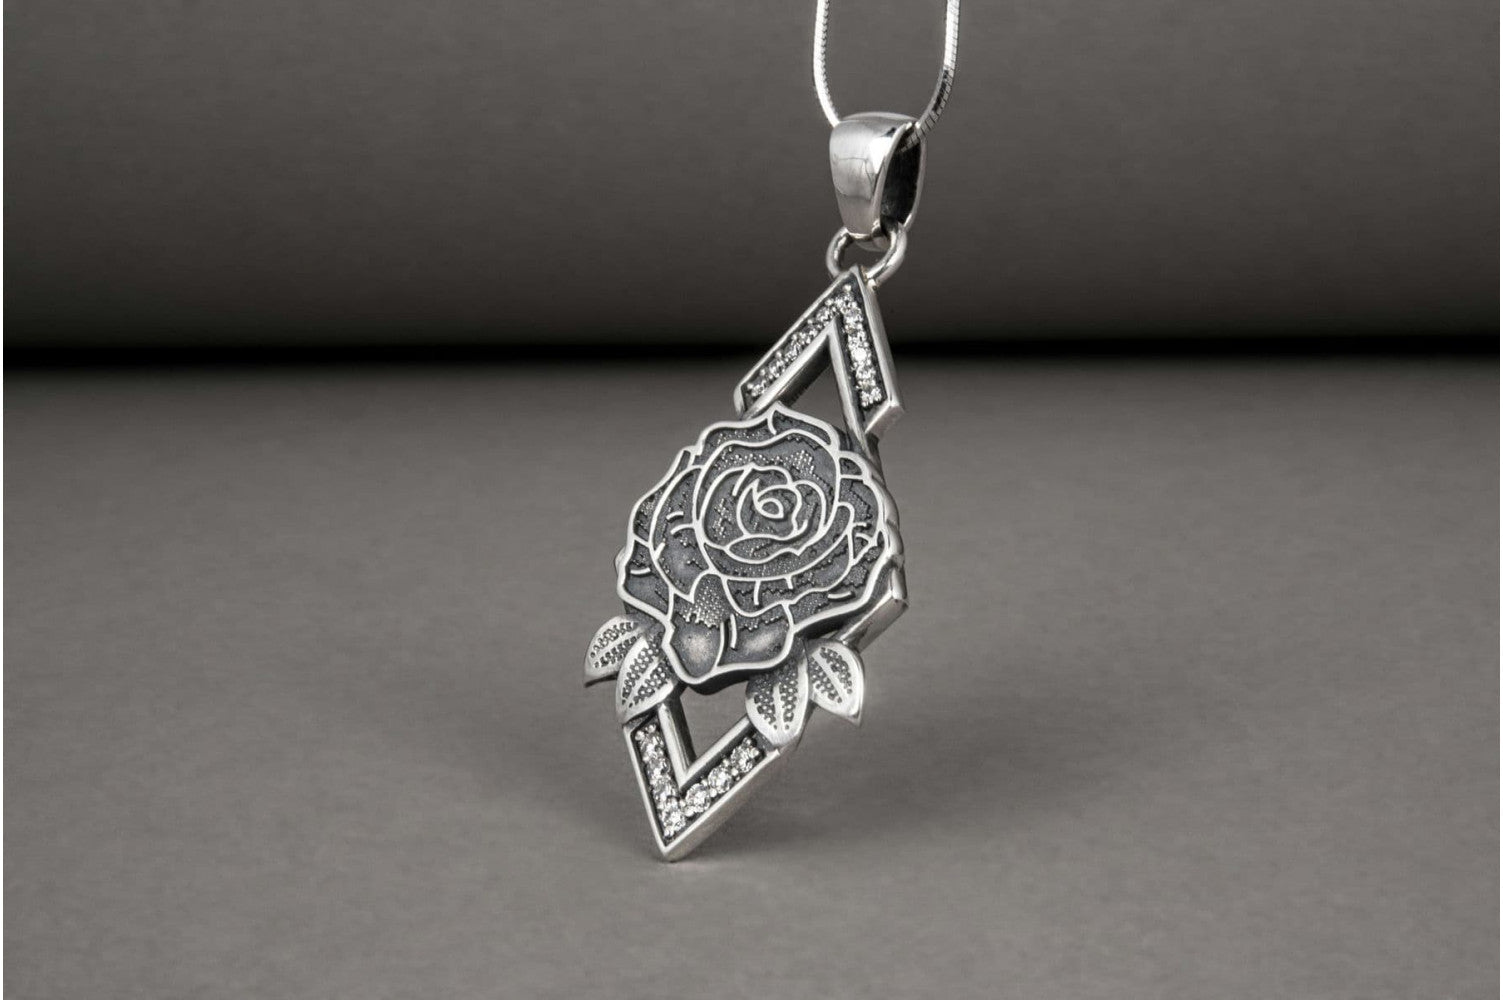 Unique onesided Rose pendant with gems, handcrafted sterling silver jewelry - vikingworkshop